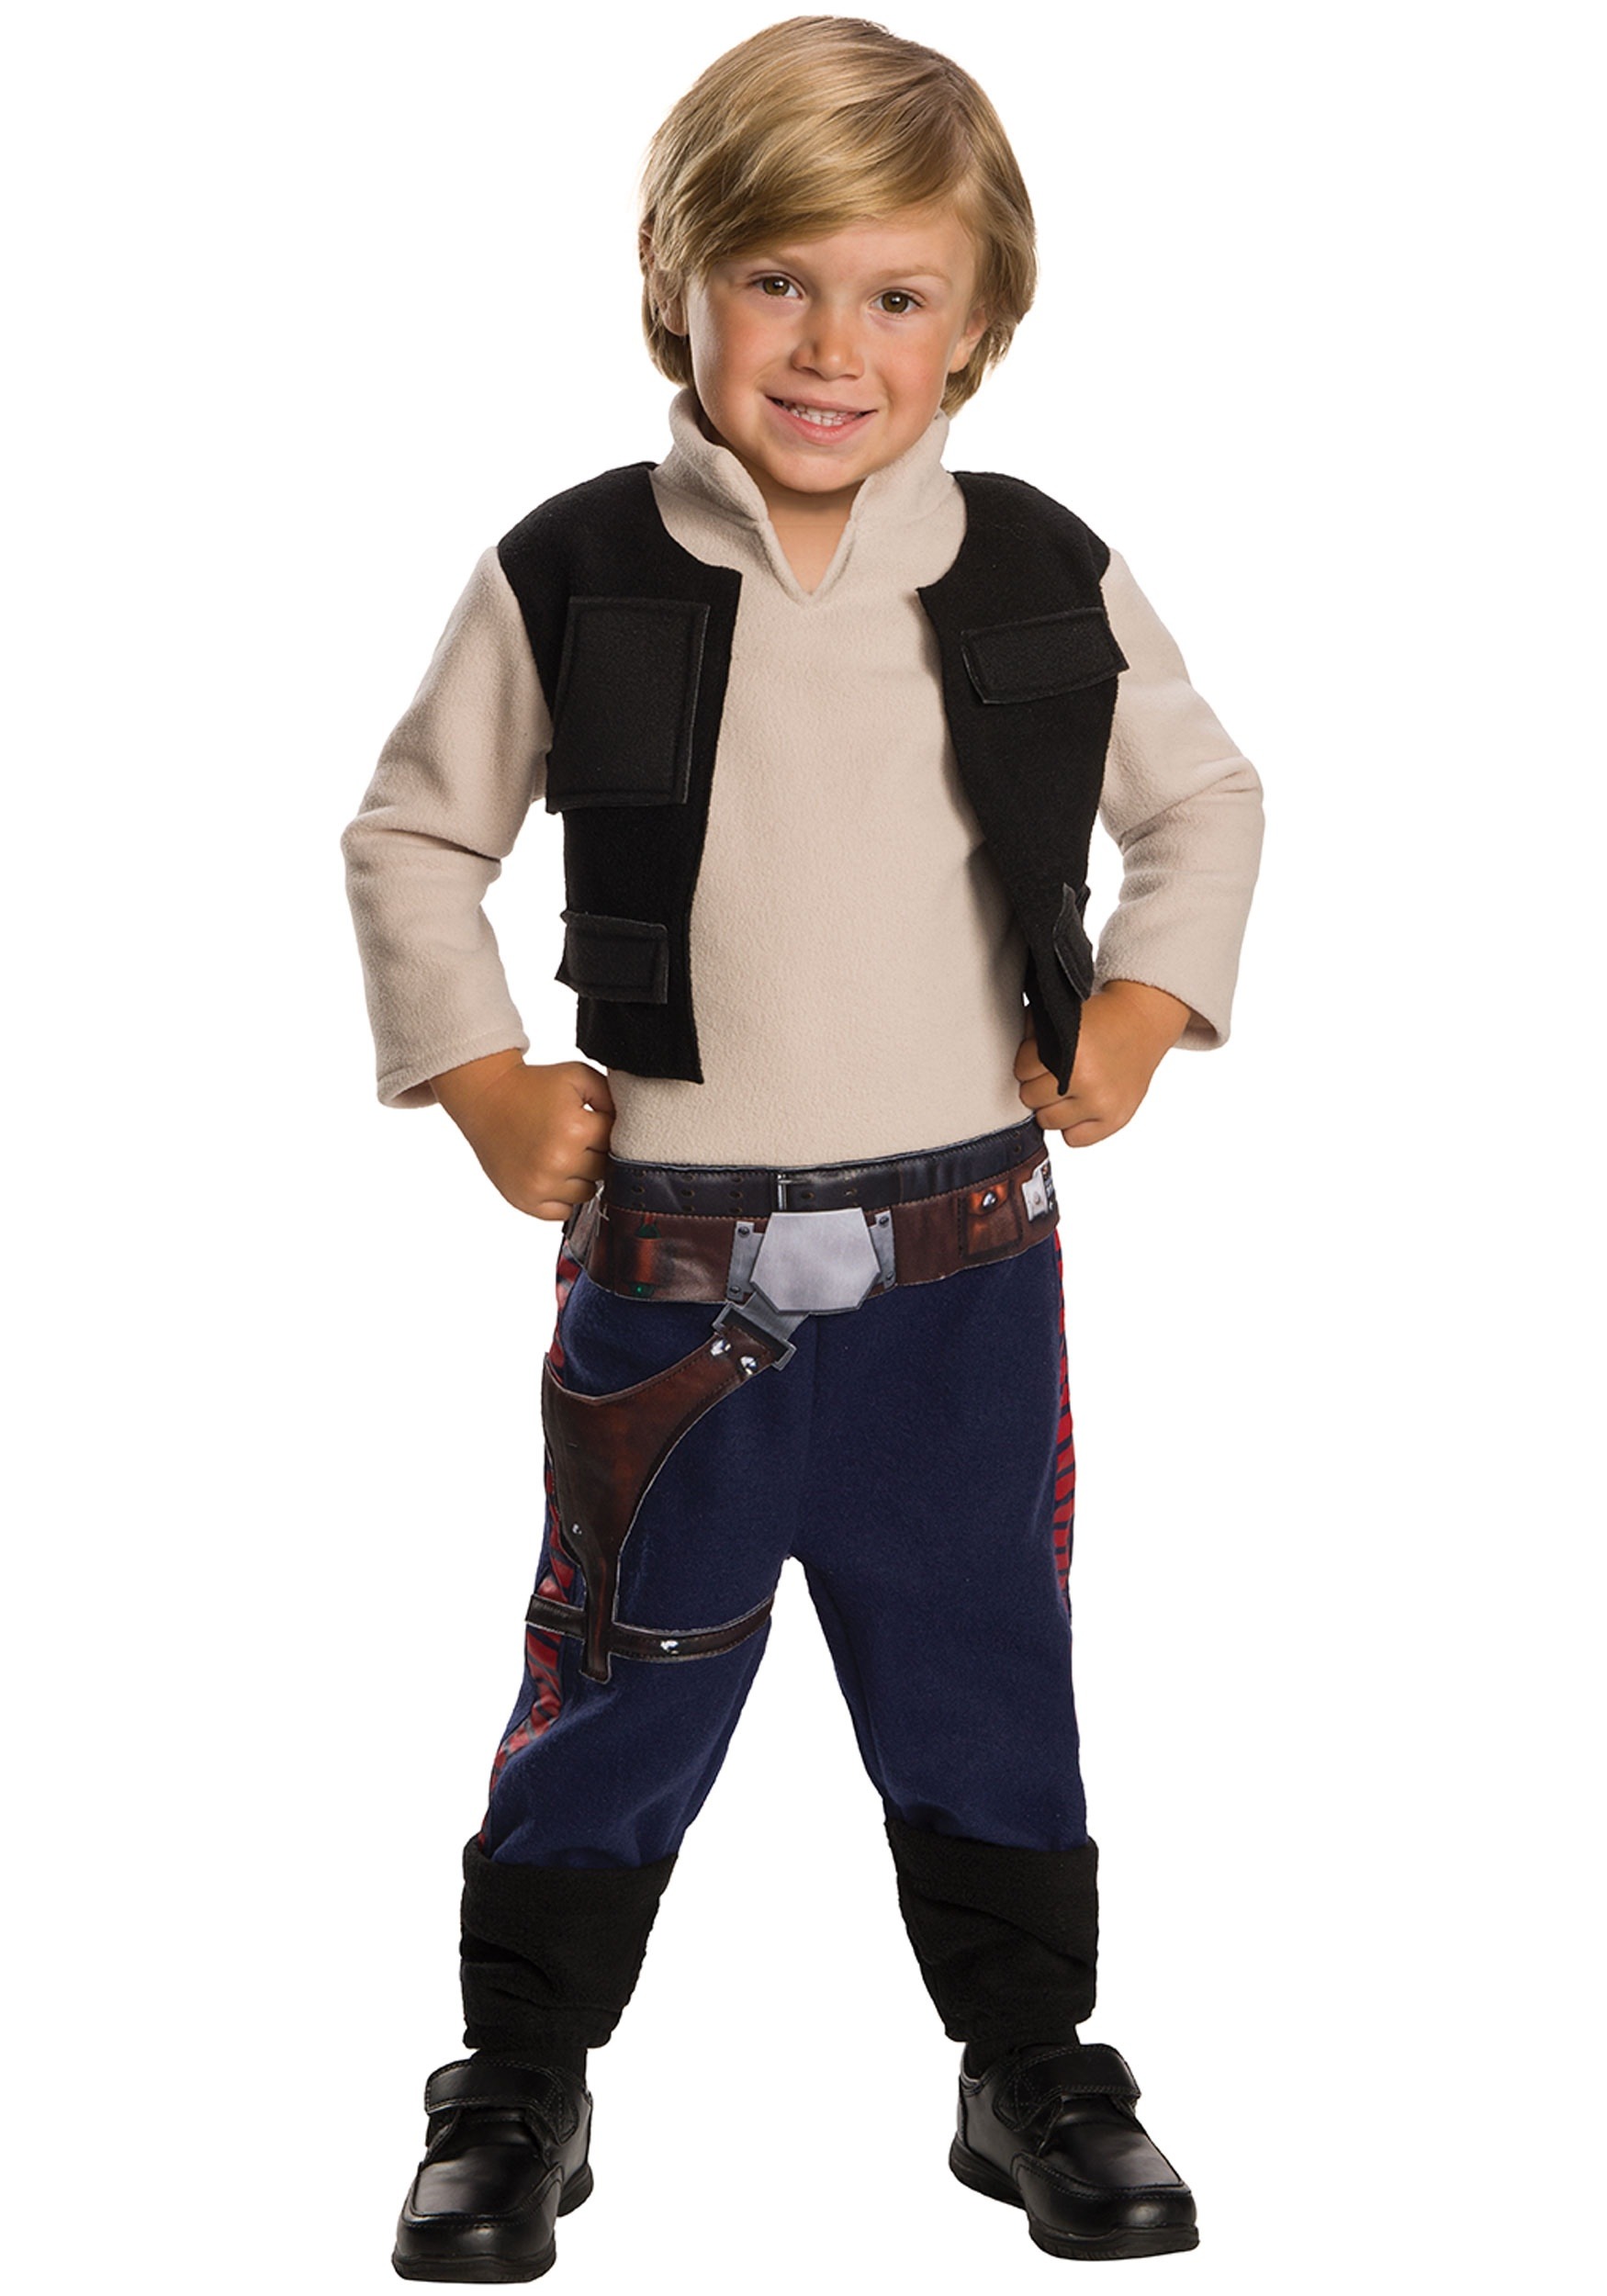 Photos - Fancy Dress Rubies Costume Co. Inc Star Wars Han Solo Costume for Toddlers Brown/B 